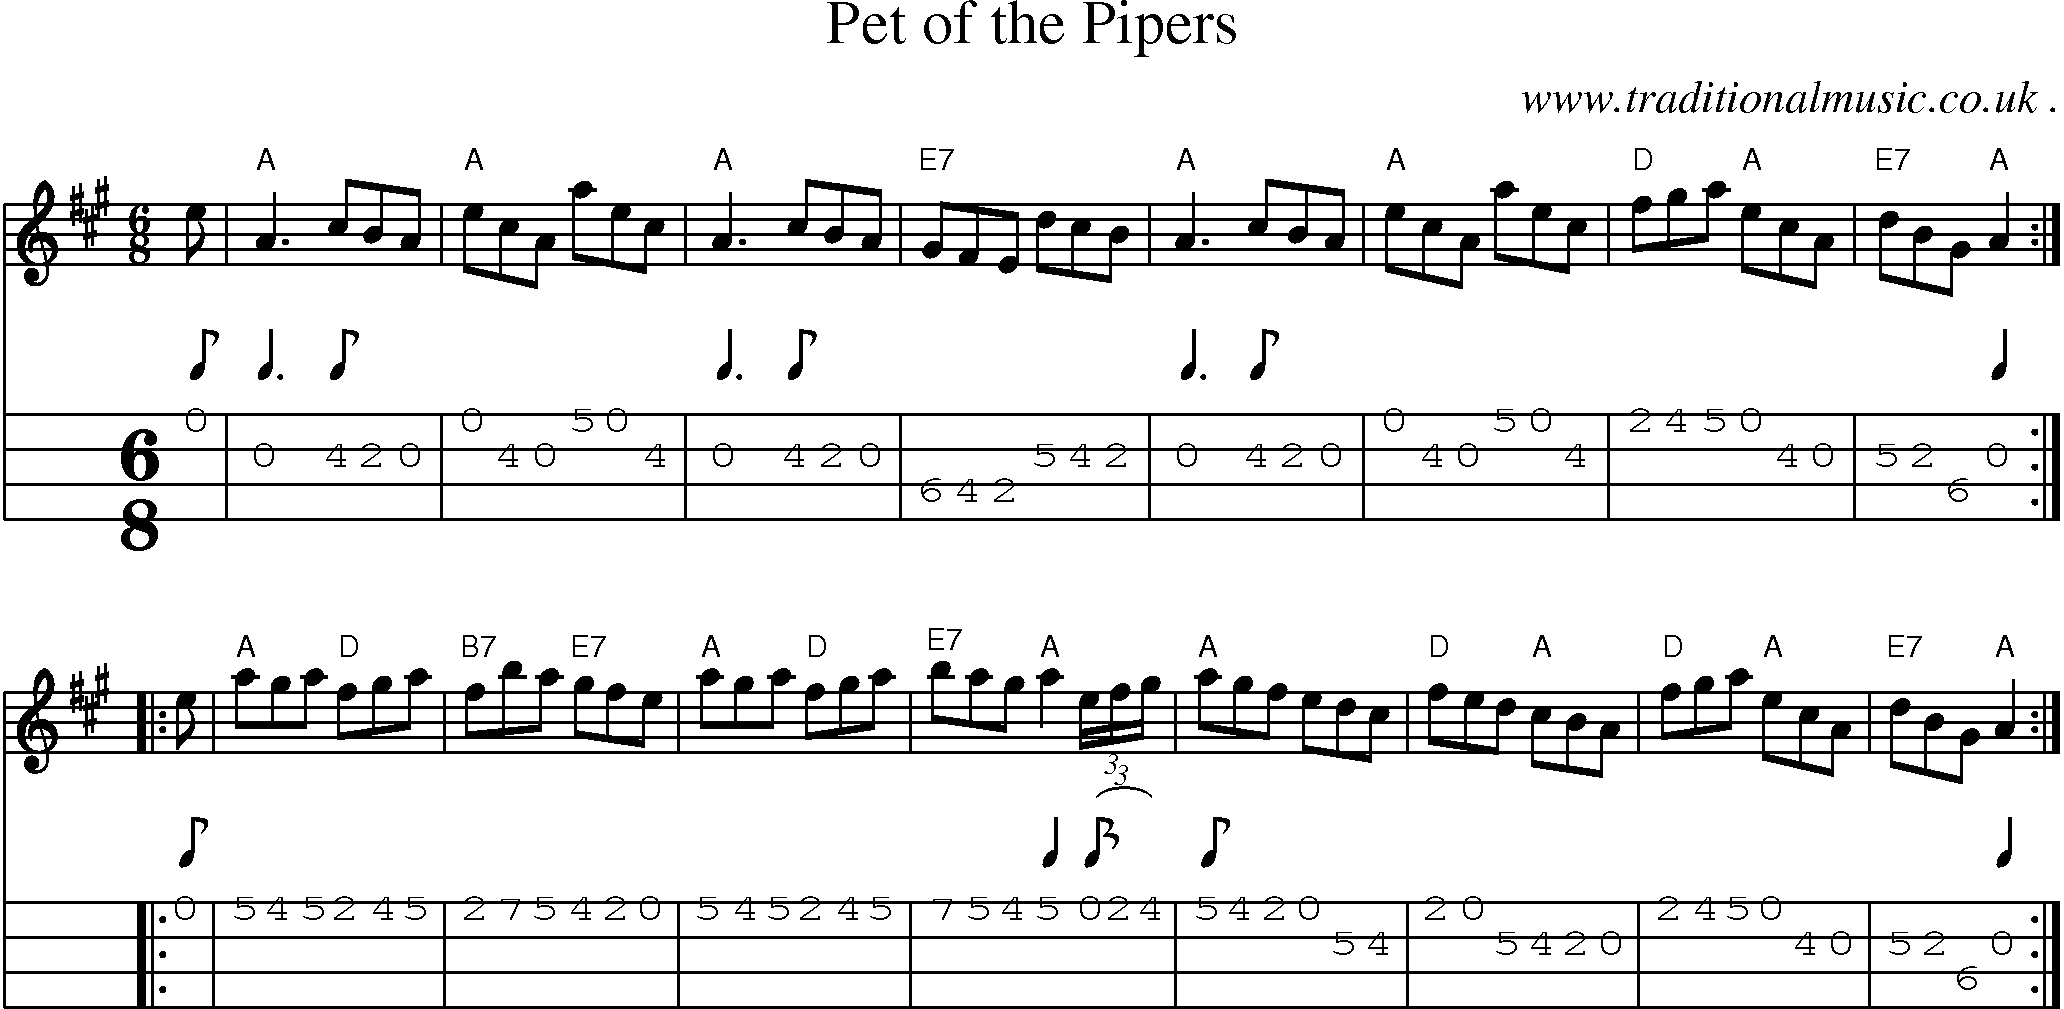 Sheet-music  score, Chords and Mandolin Tabs for Pet Of The Pipers